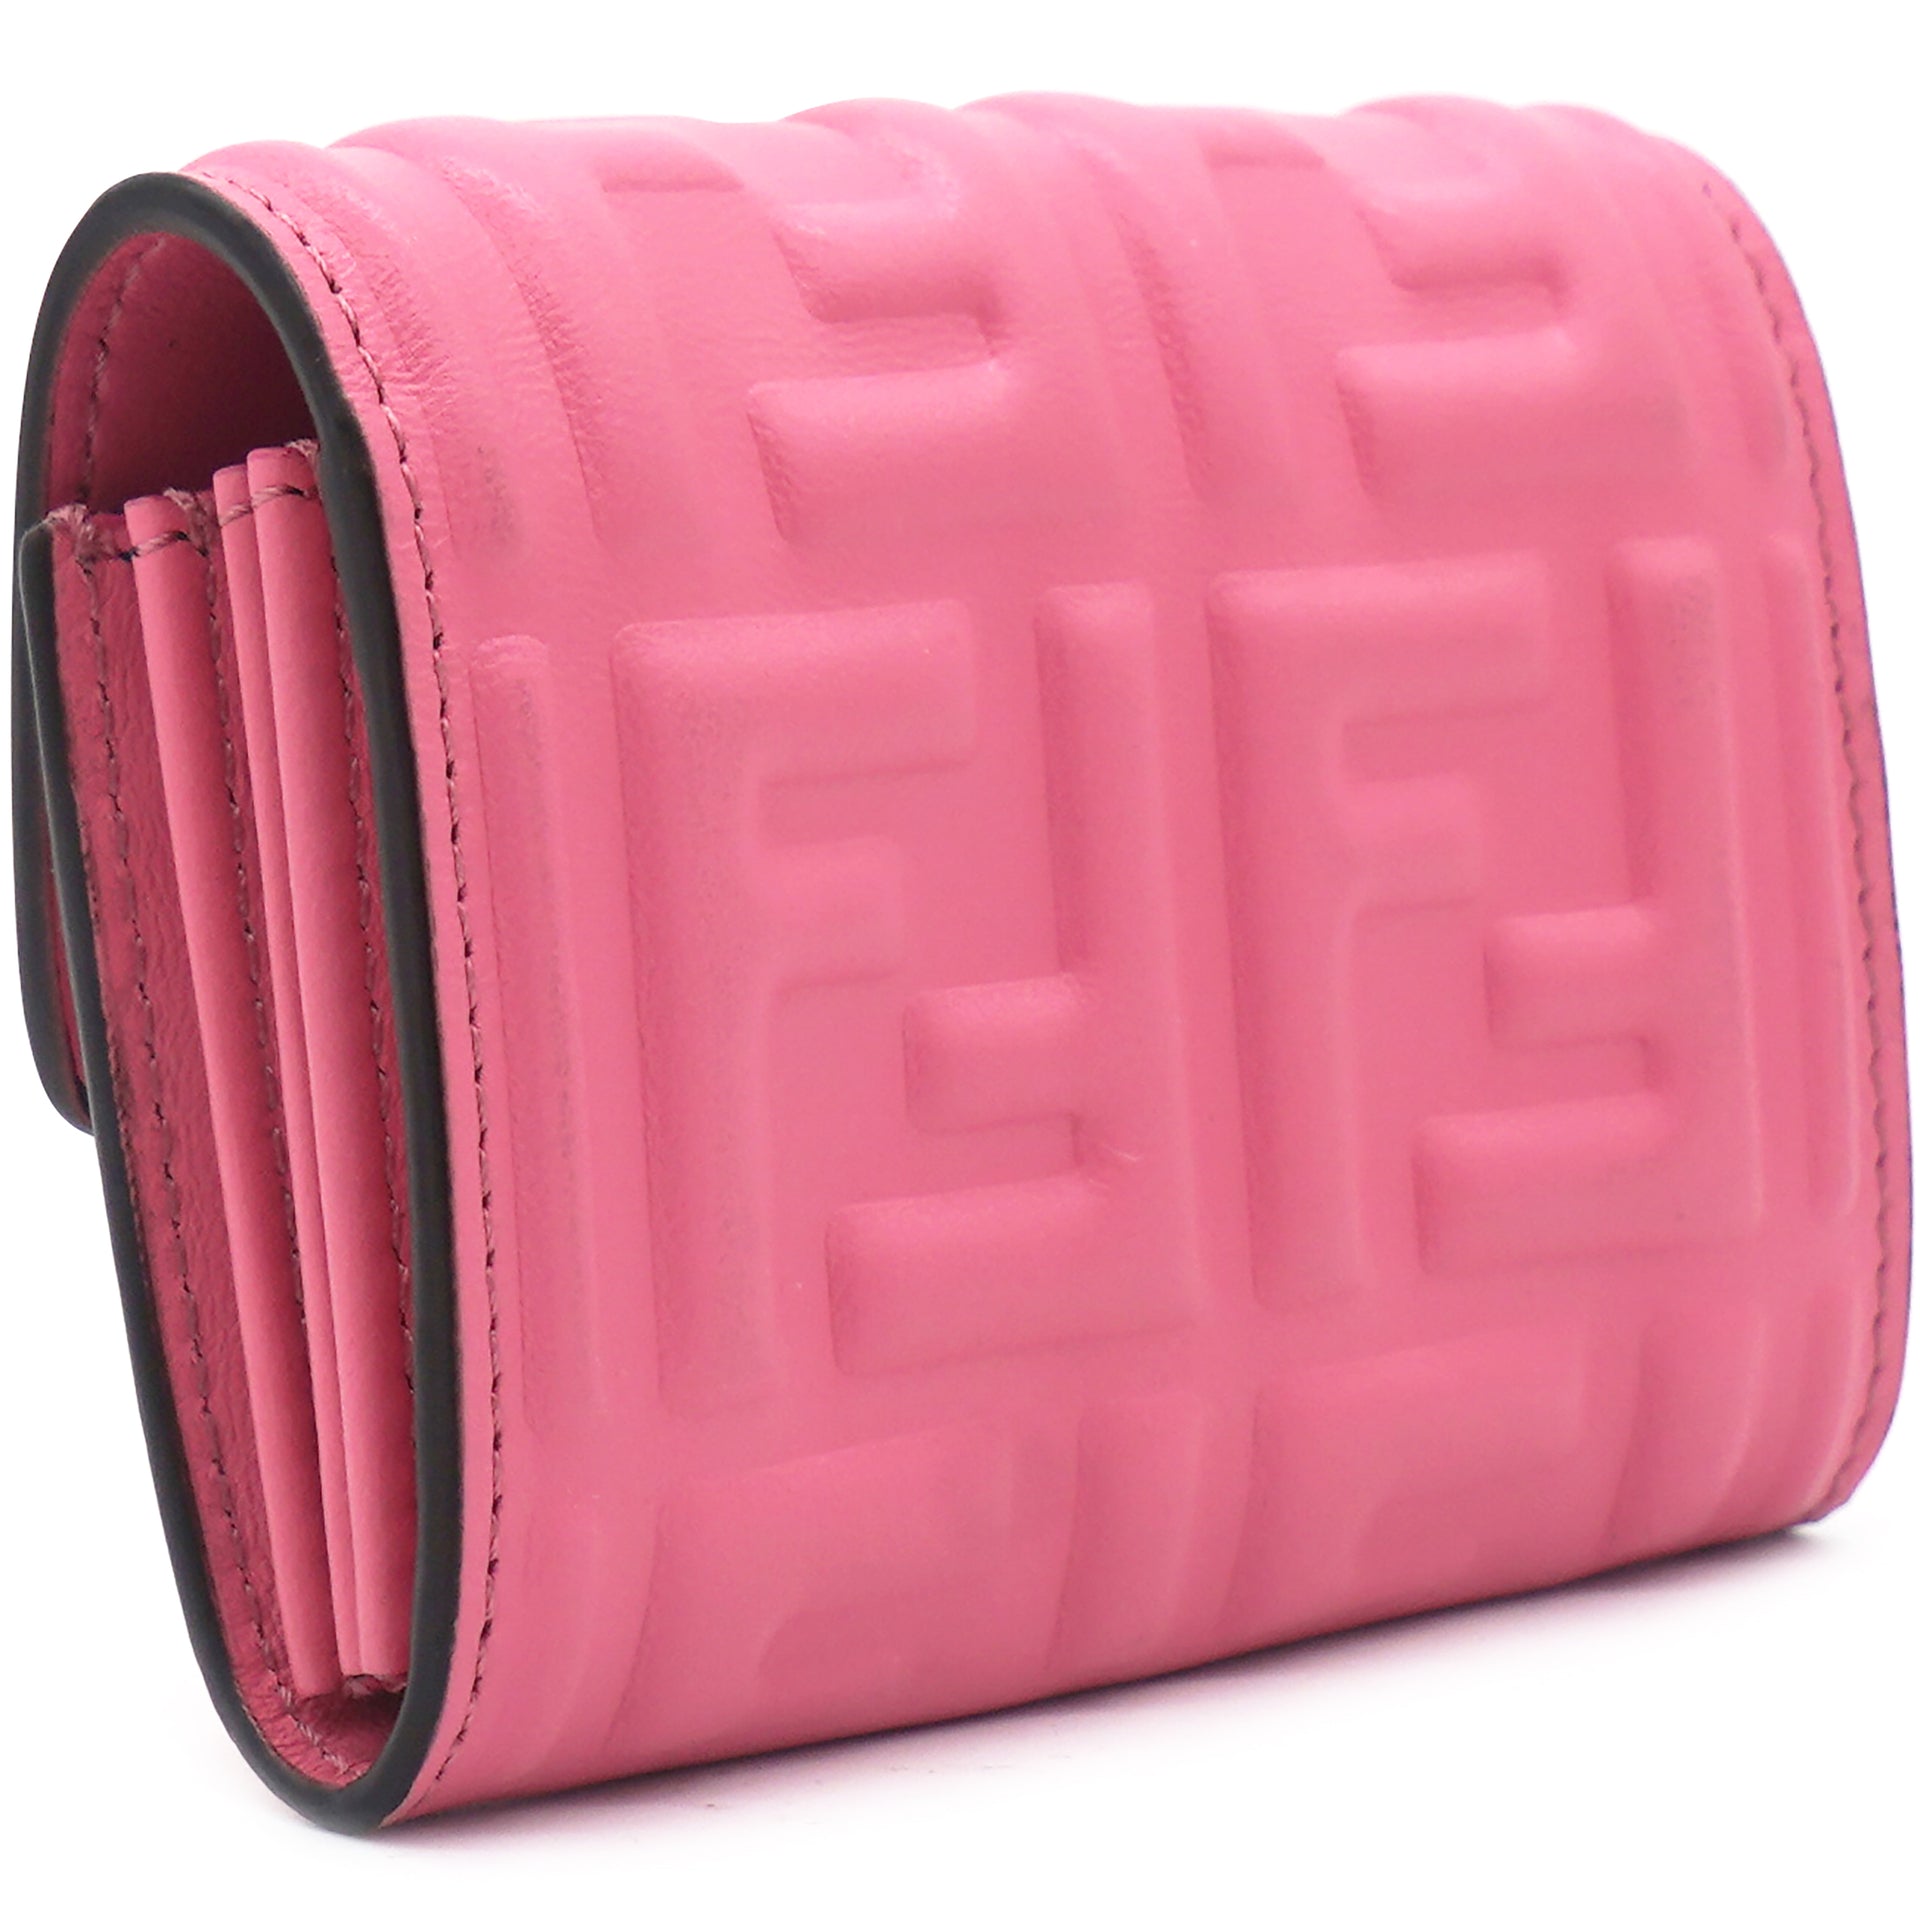 Fendi The Baguette Continental Leather Wallet in Pink